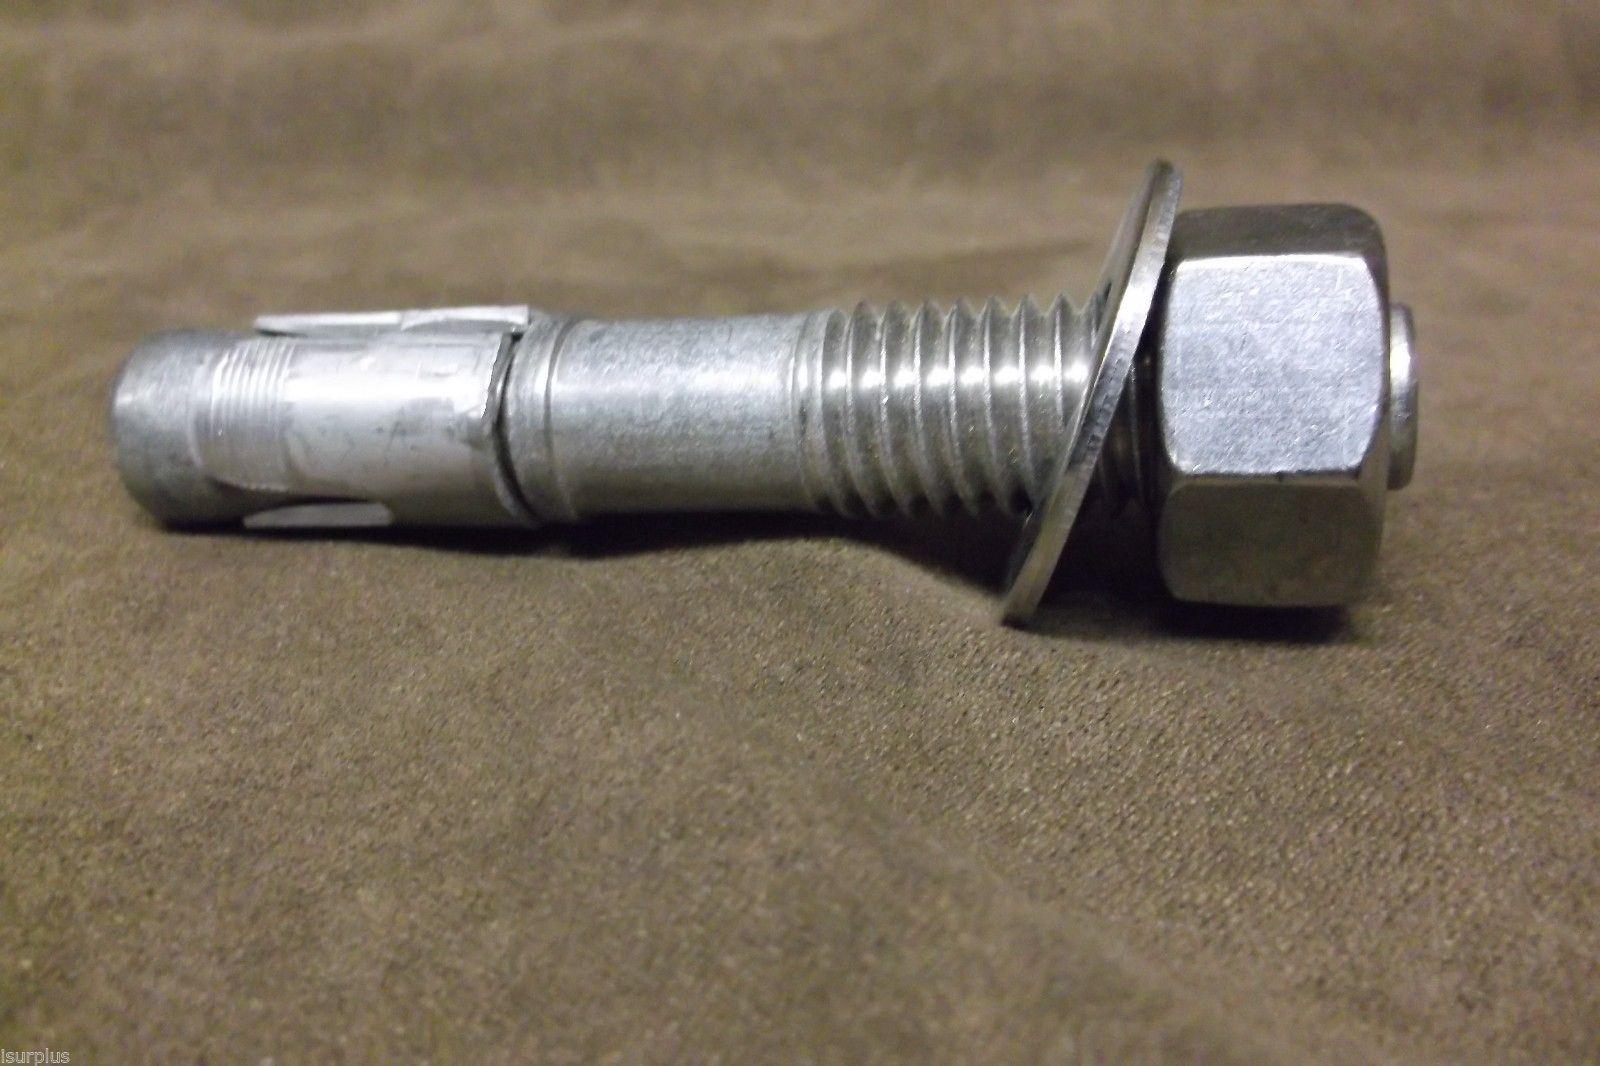 Hilti KB3 Stainless Steel 1/2"x3-3/4" Concrete Anchors Part # 282569 1 2 Stainless Steel Concrete Anchors